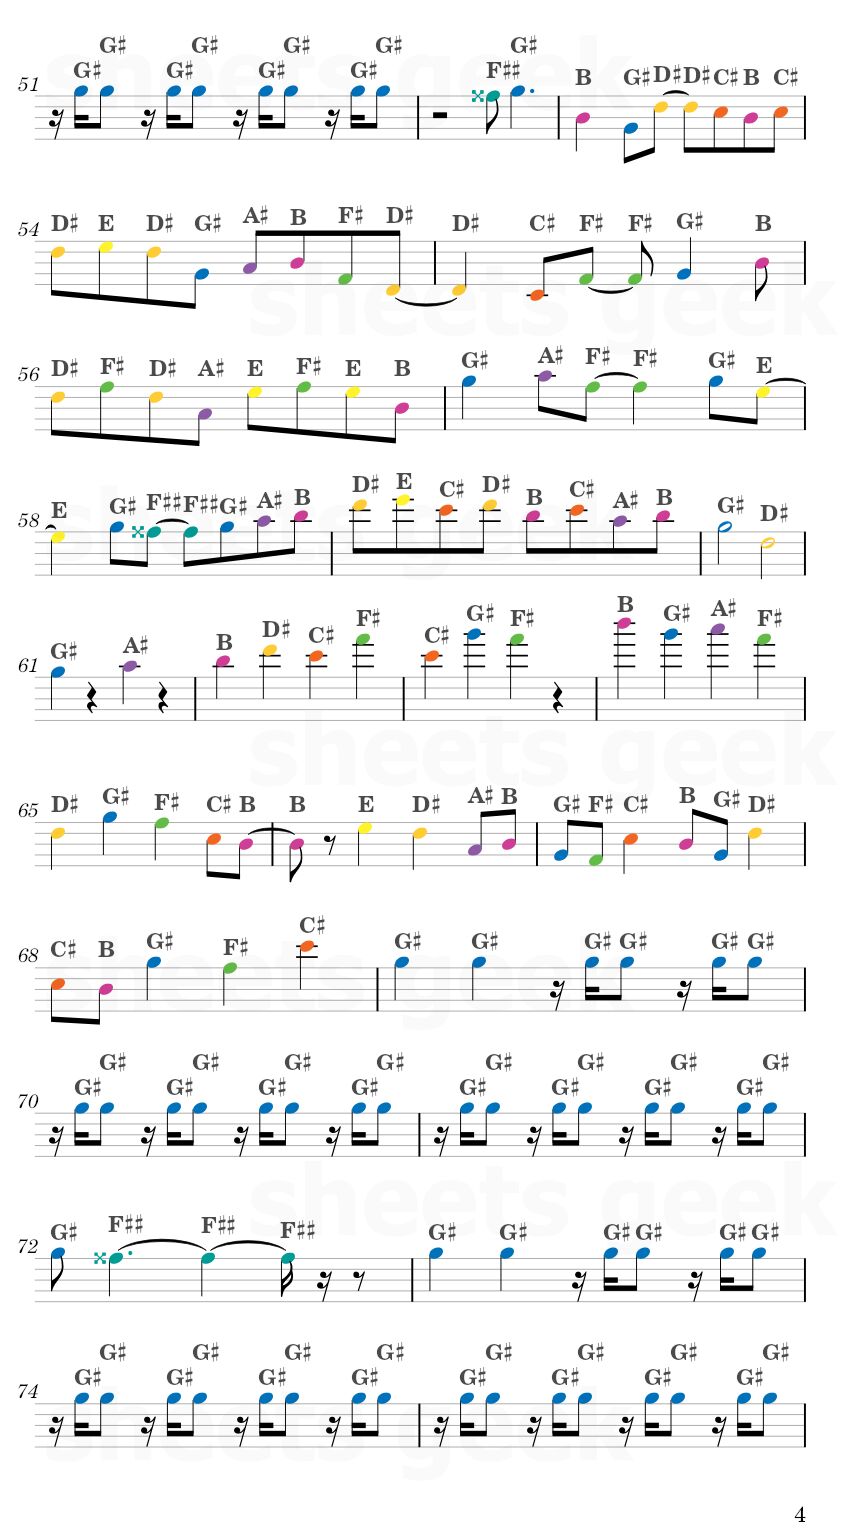 Discord - The Living Tombstone (My Little Pony: Friendship Is Magic) Easy Sheet Music Free for piano, keyboard, flute, violin, sax, cello page 4